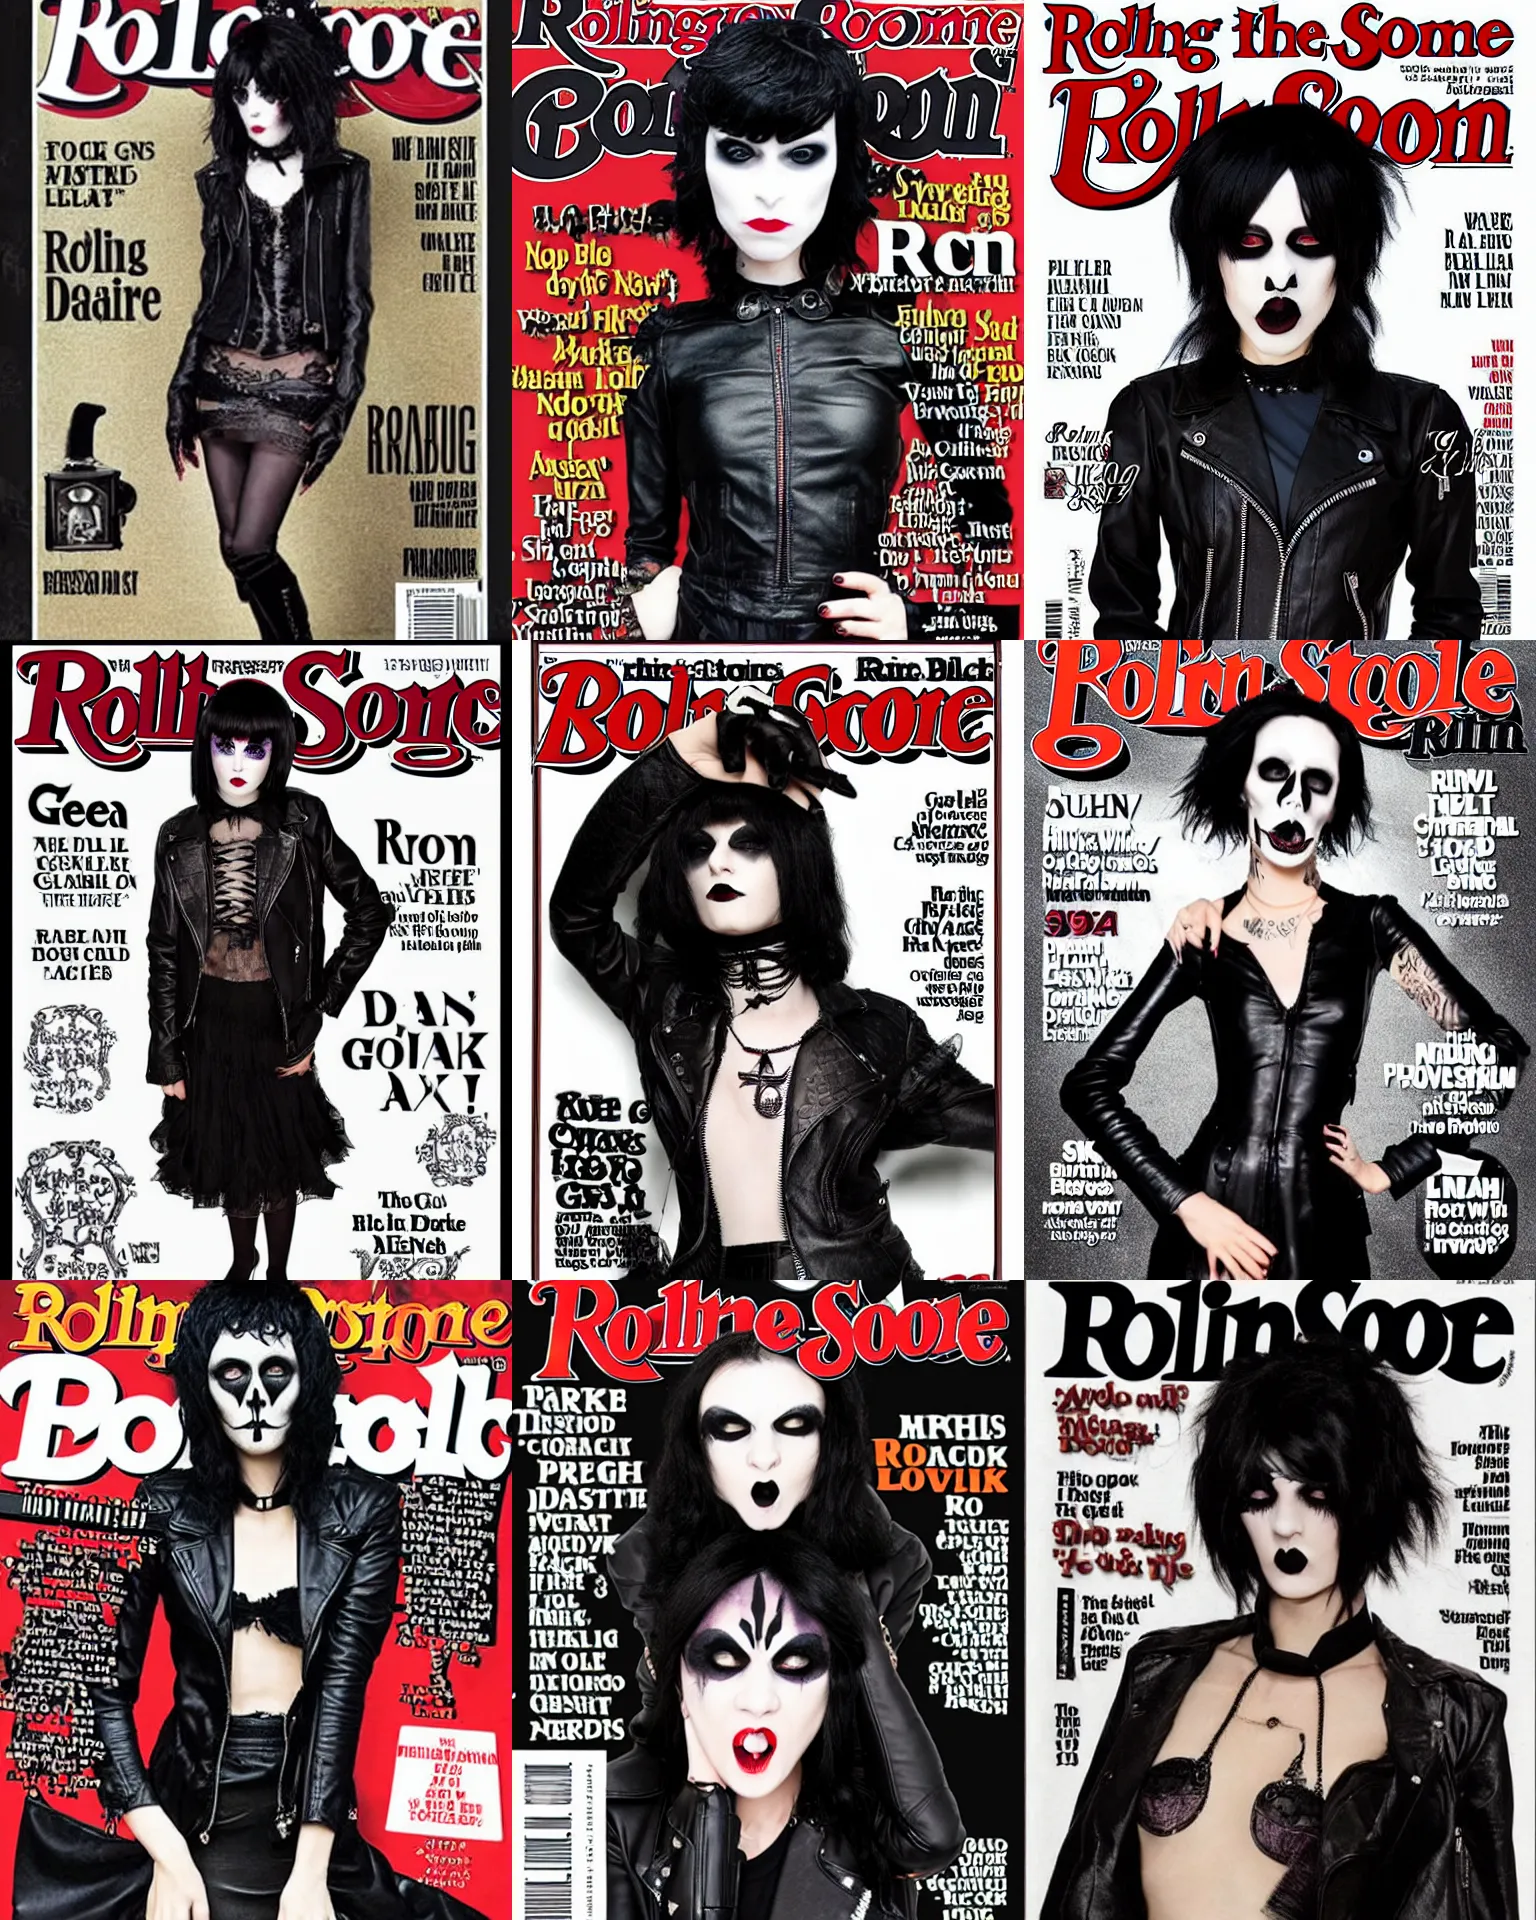 Prompt: A goth on the cover of Rolling Stone magazine. She has large evil eyes with entirely-black sclera!!!!!! Her hair is dark brown and cut into a short, messy pixie cut. She has a slightly rounded face, with a pointed chin, and a small nose. She is wearing a black leather jacket, a black knee-length skirt, a black choker, and black leather boots.